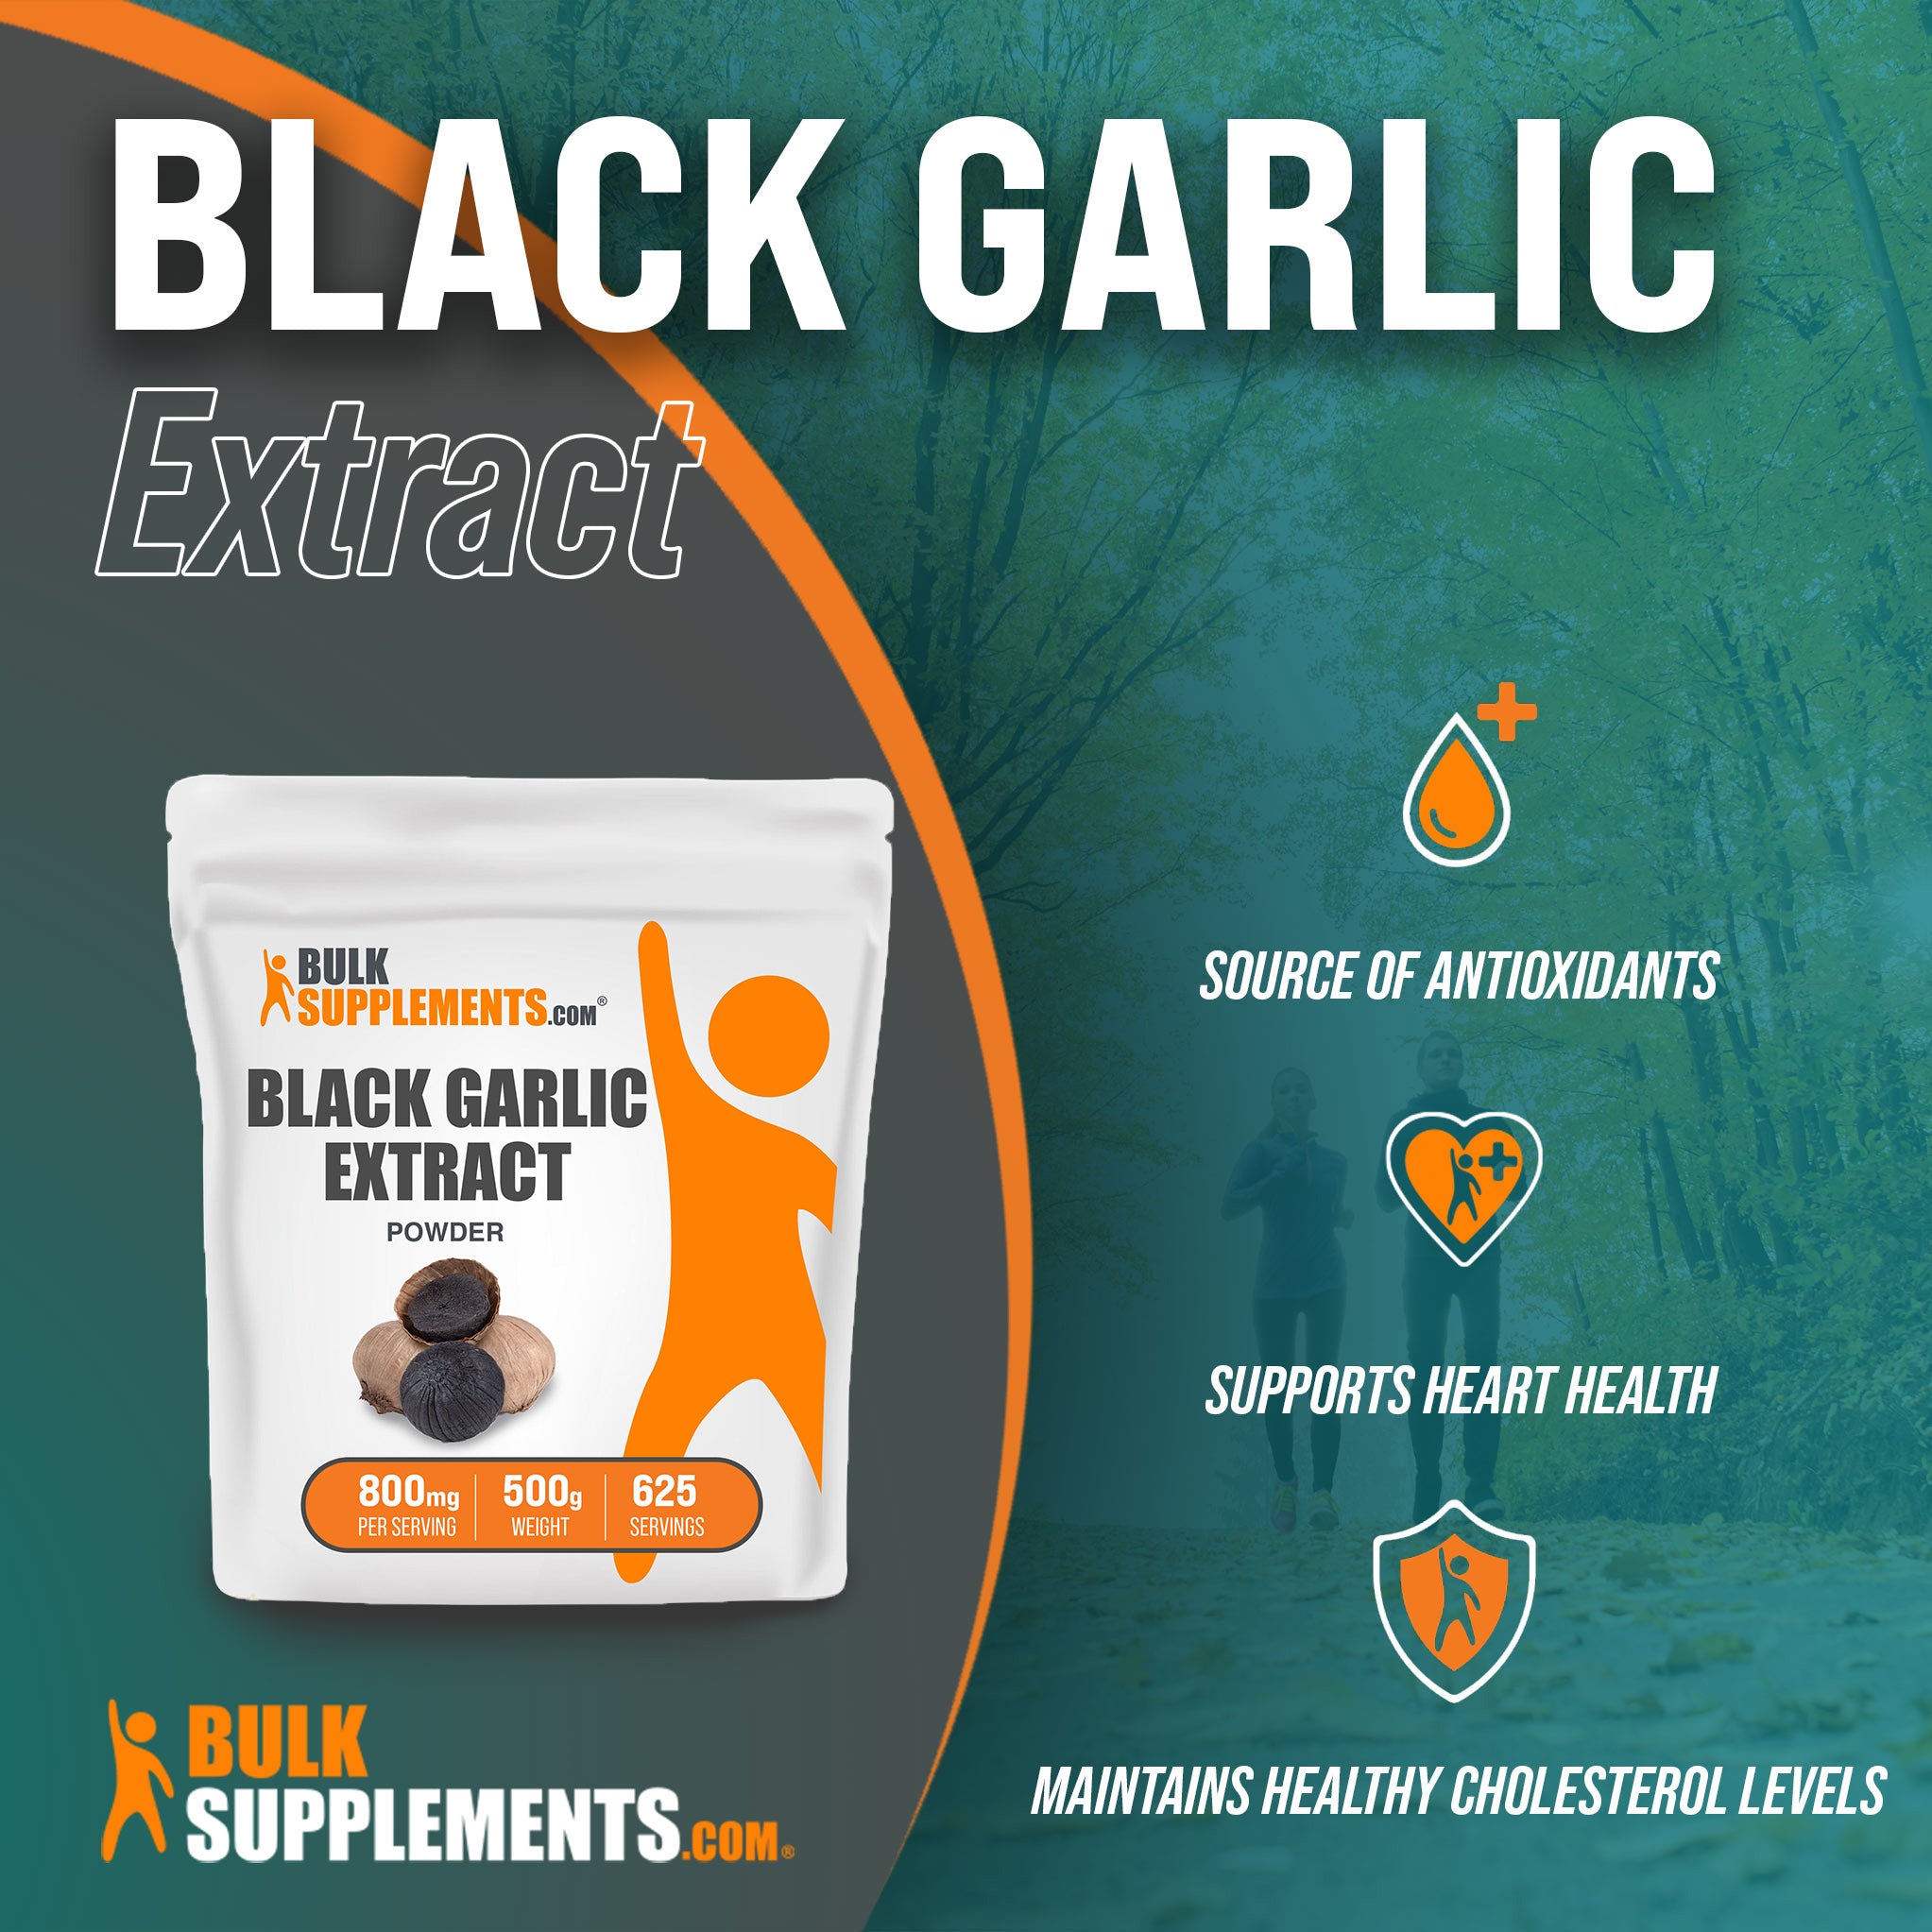 500g bags of Black Garlic Extract are ideal antioxidants supplements